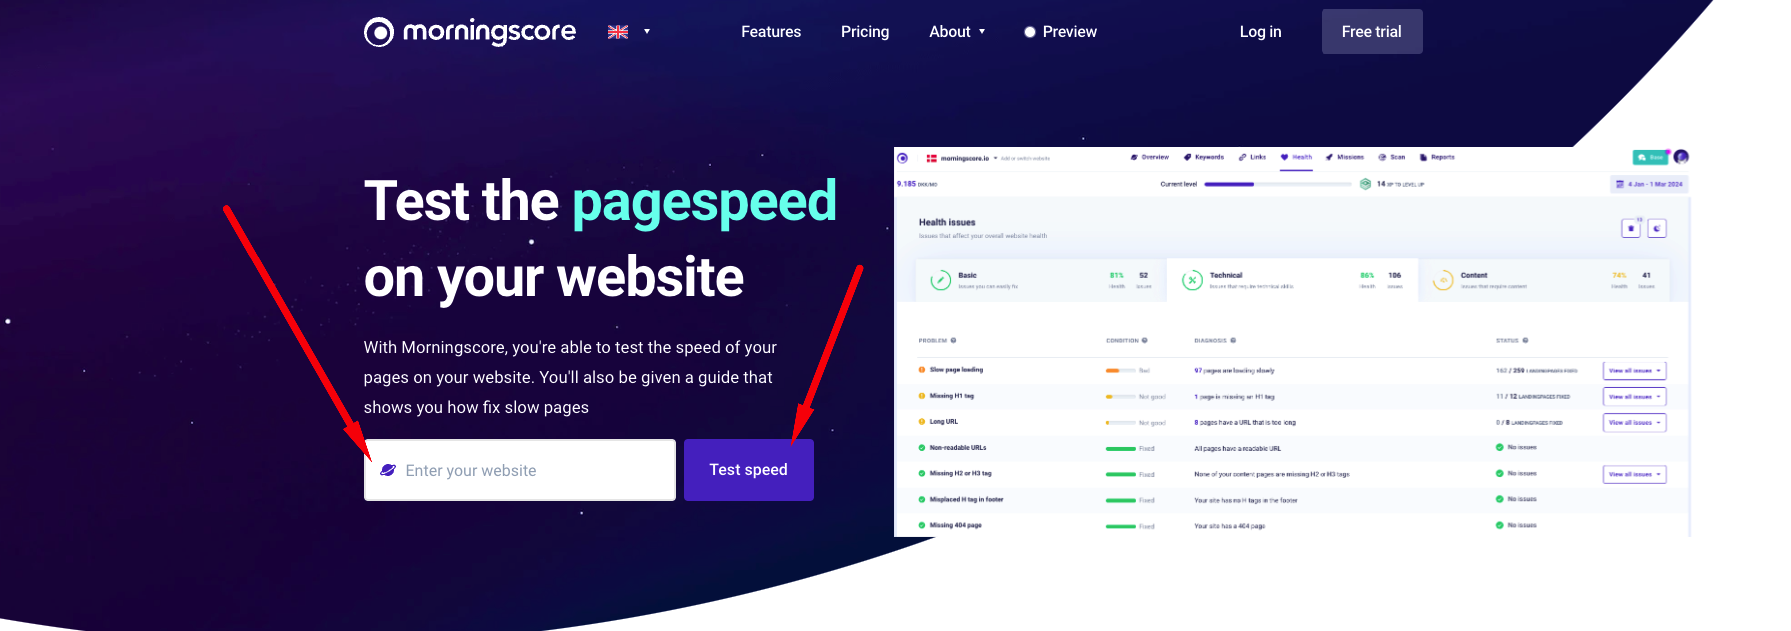 enter your website to test the speed of your pages